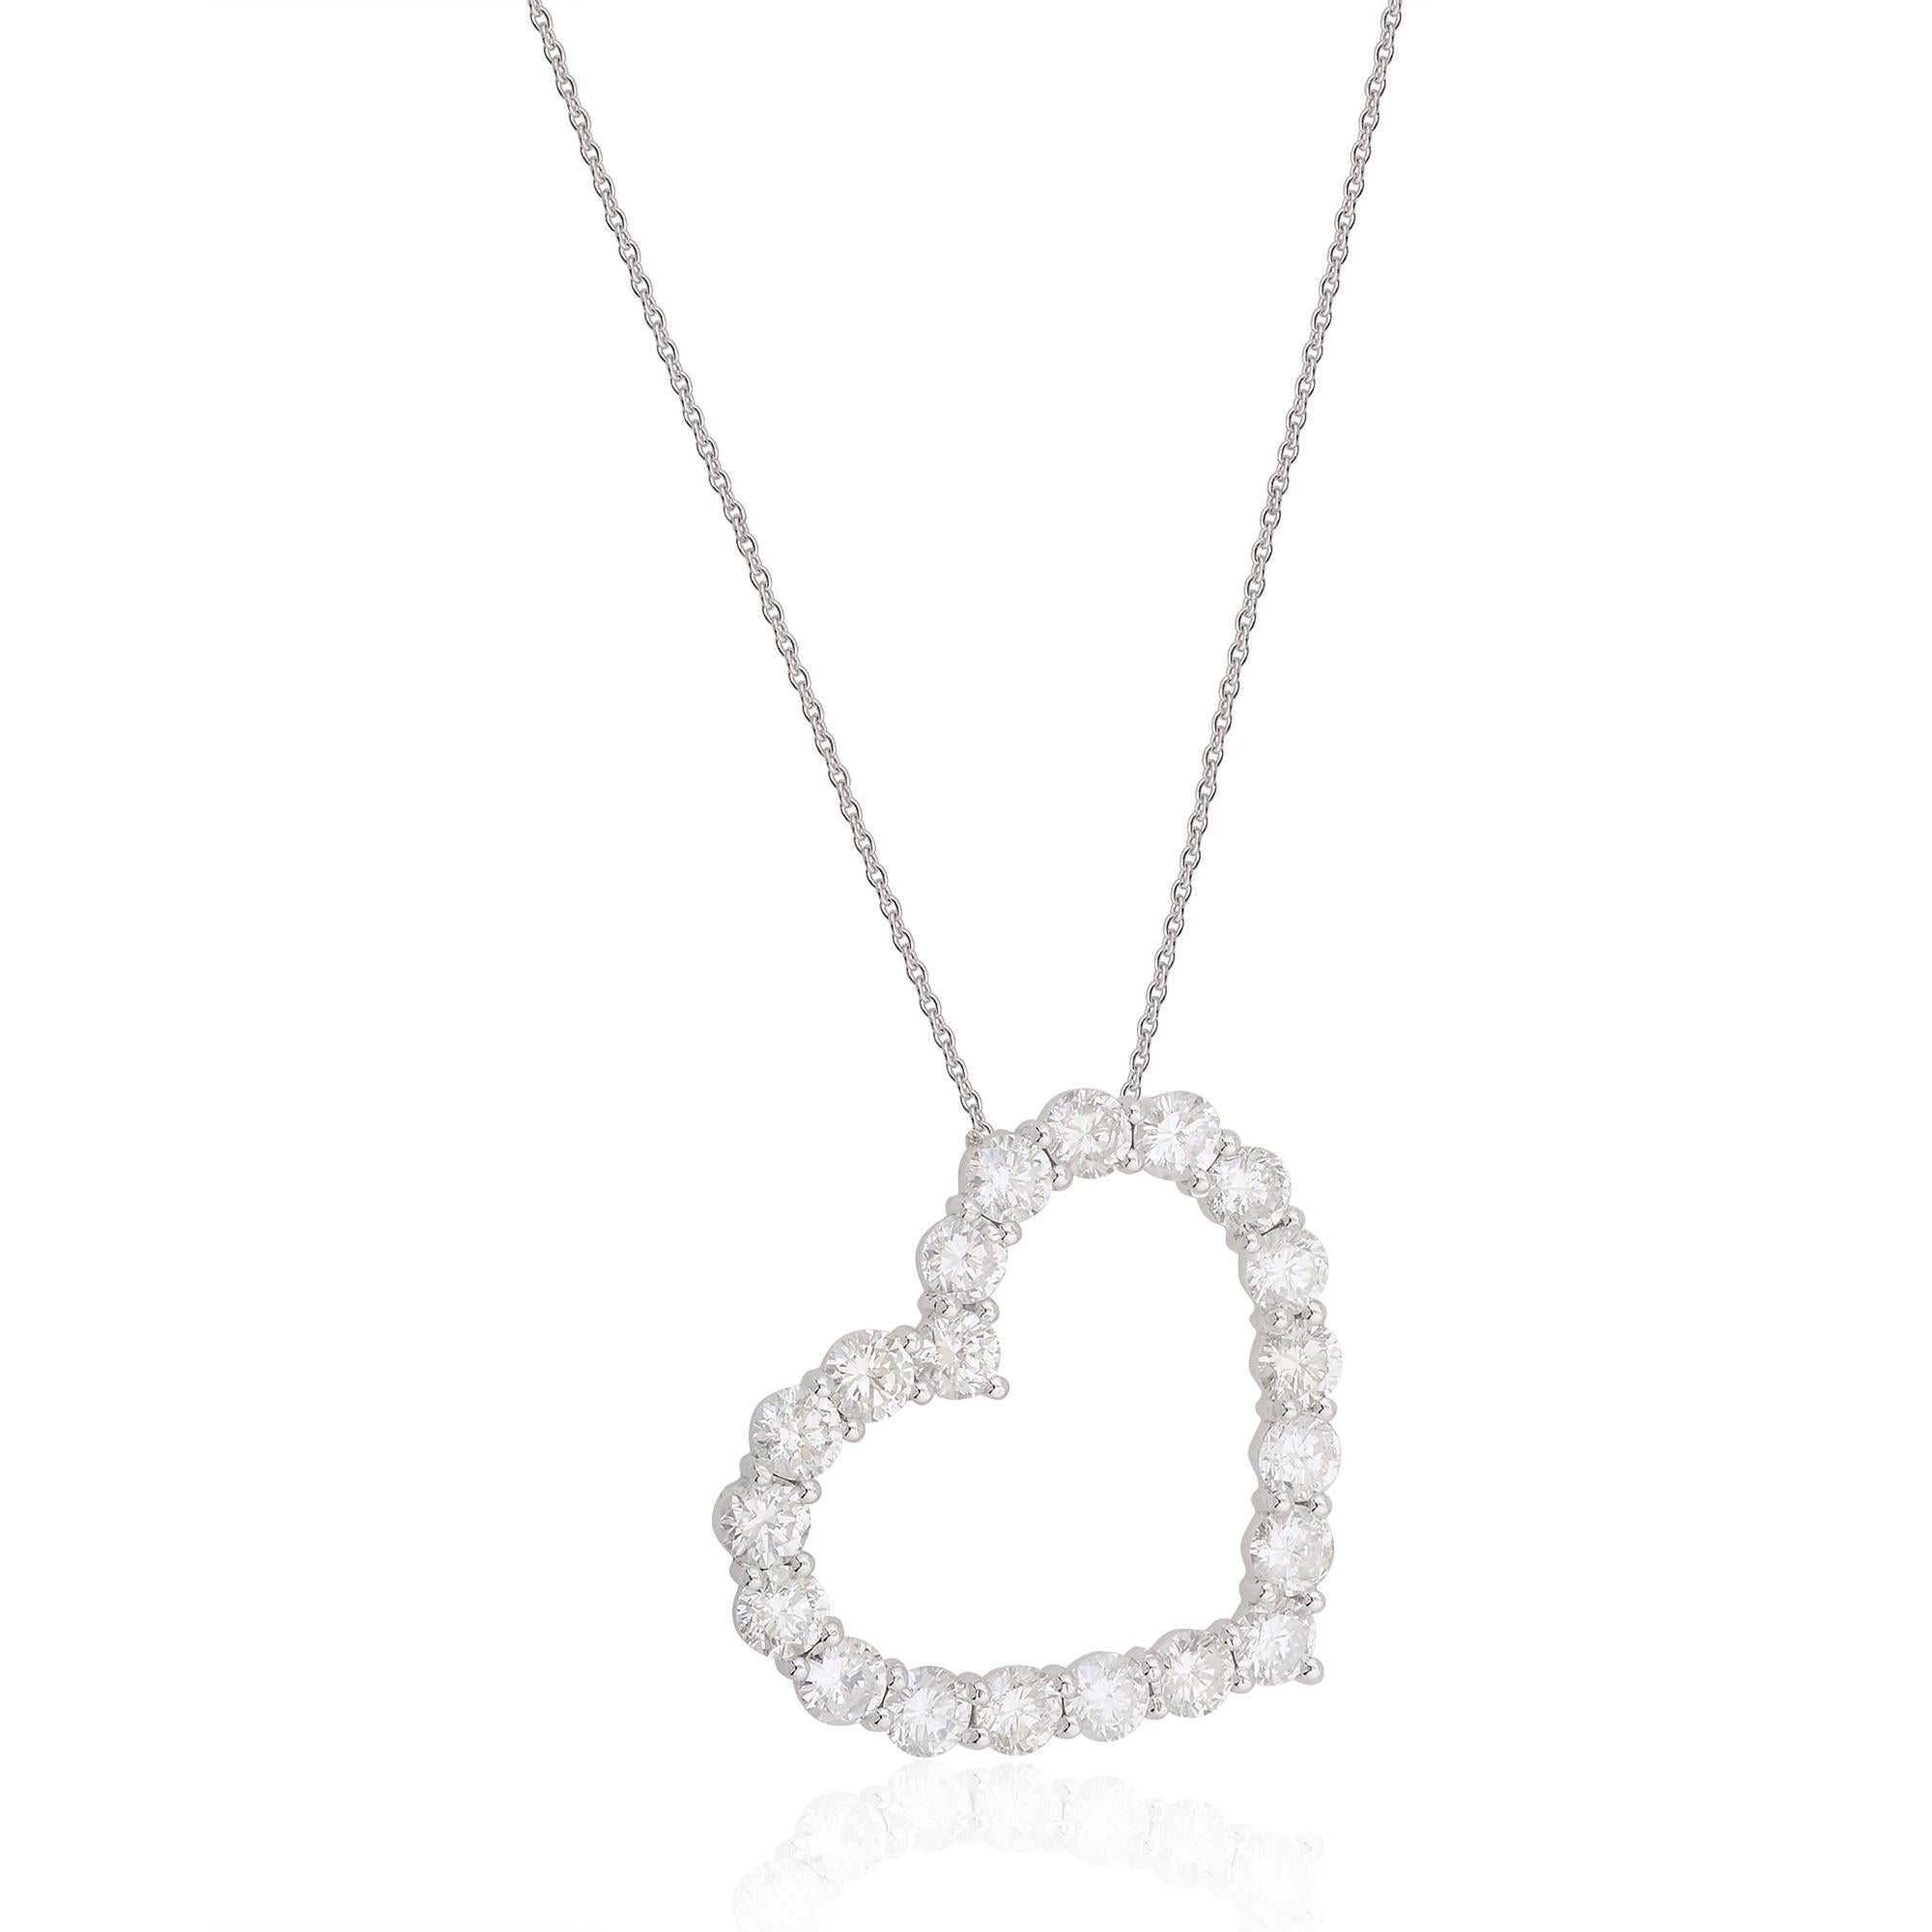 Immerse yourself in the romantic elegance of this exquisite 4.31 Carat SI Clarity H Color Pave Diamond Heart Charm Pendant Necklace. Crafted in 14k gold, this stunning piece showcases a captivating heart-shaped pendant adorned with a shimmering pave